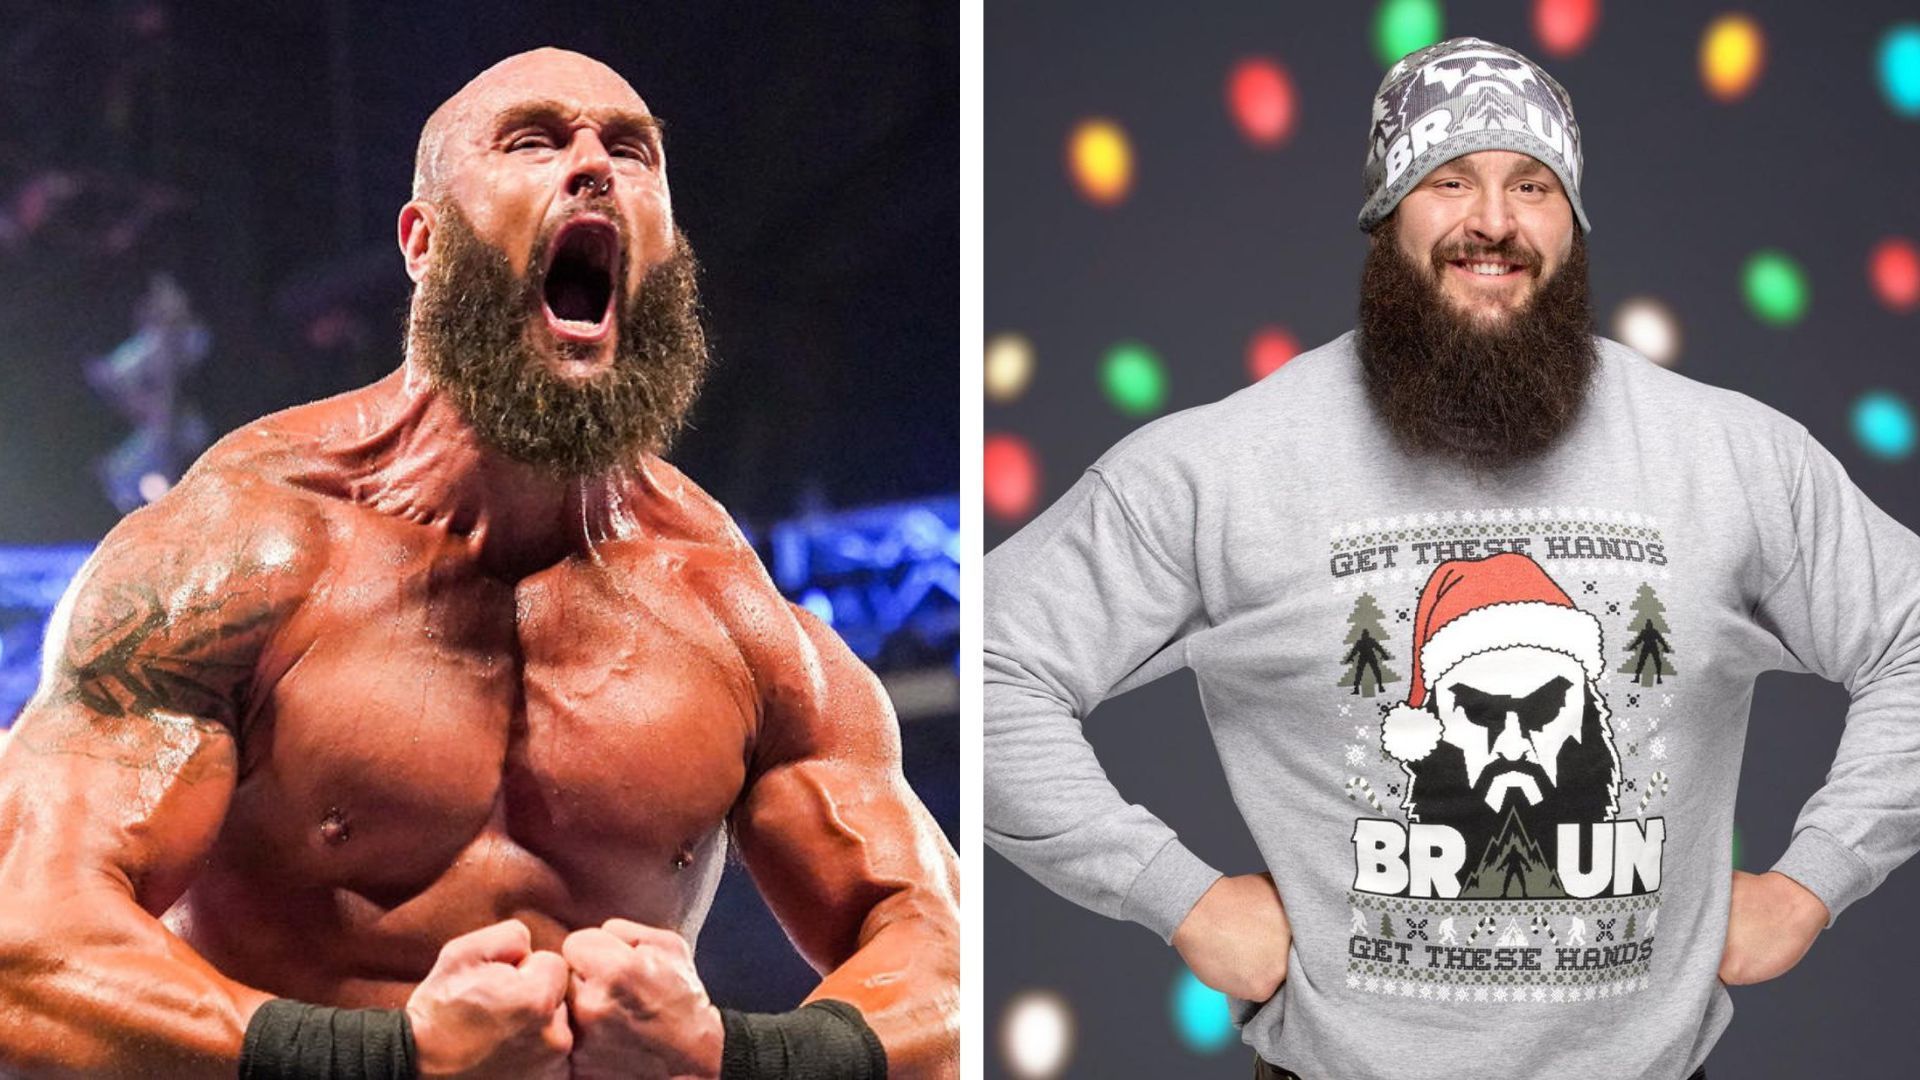 Braun Strowman is set for a Street Fight on WWE SmackDown 